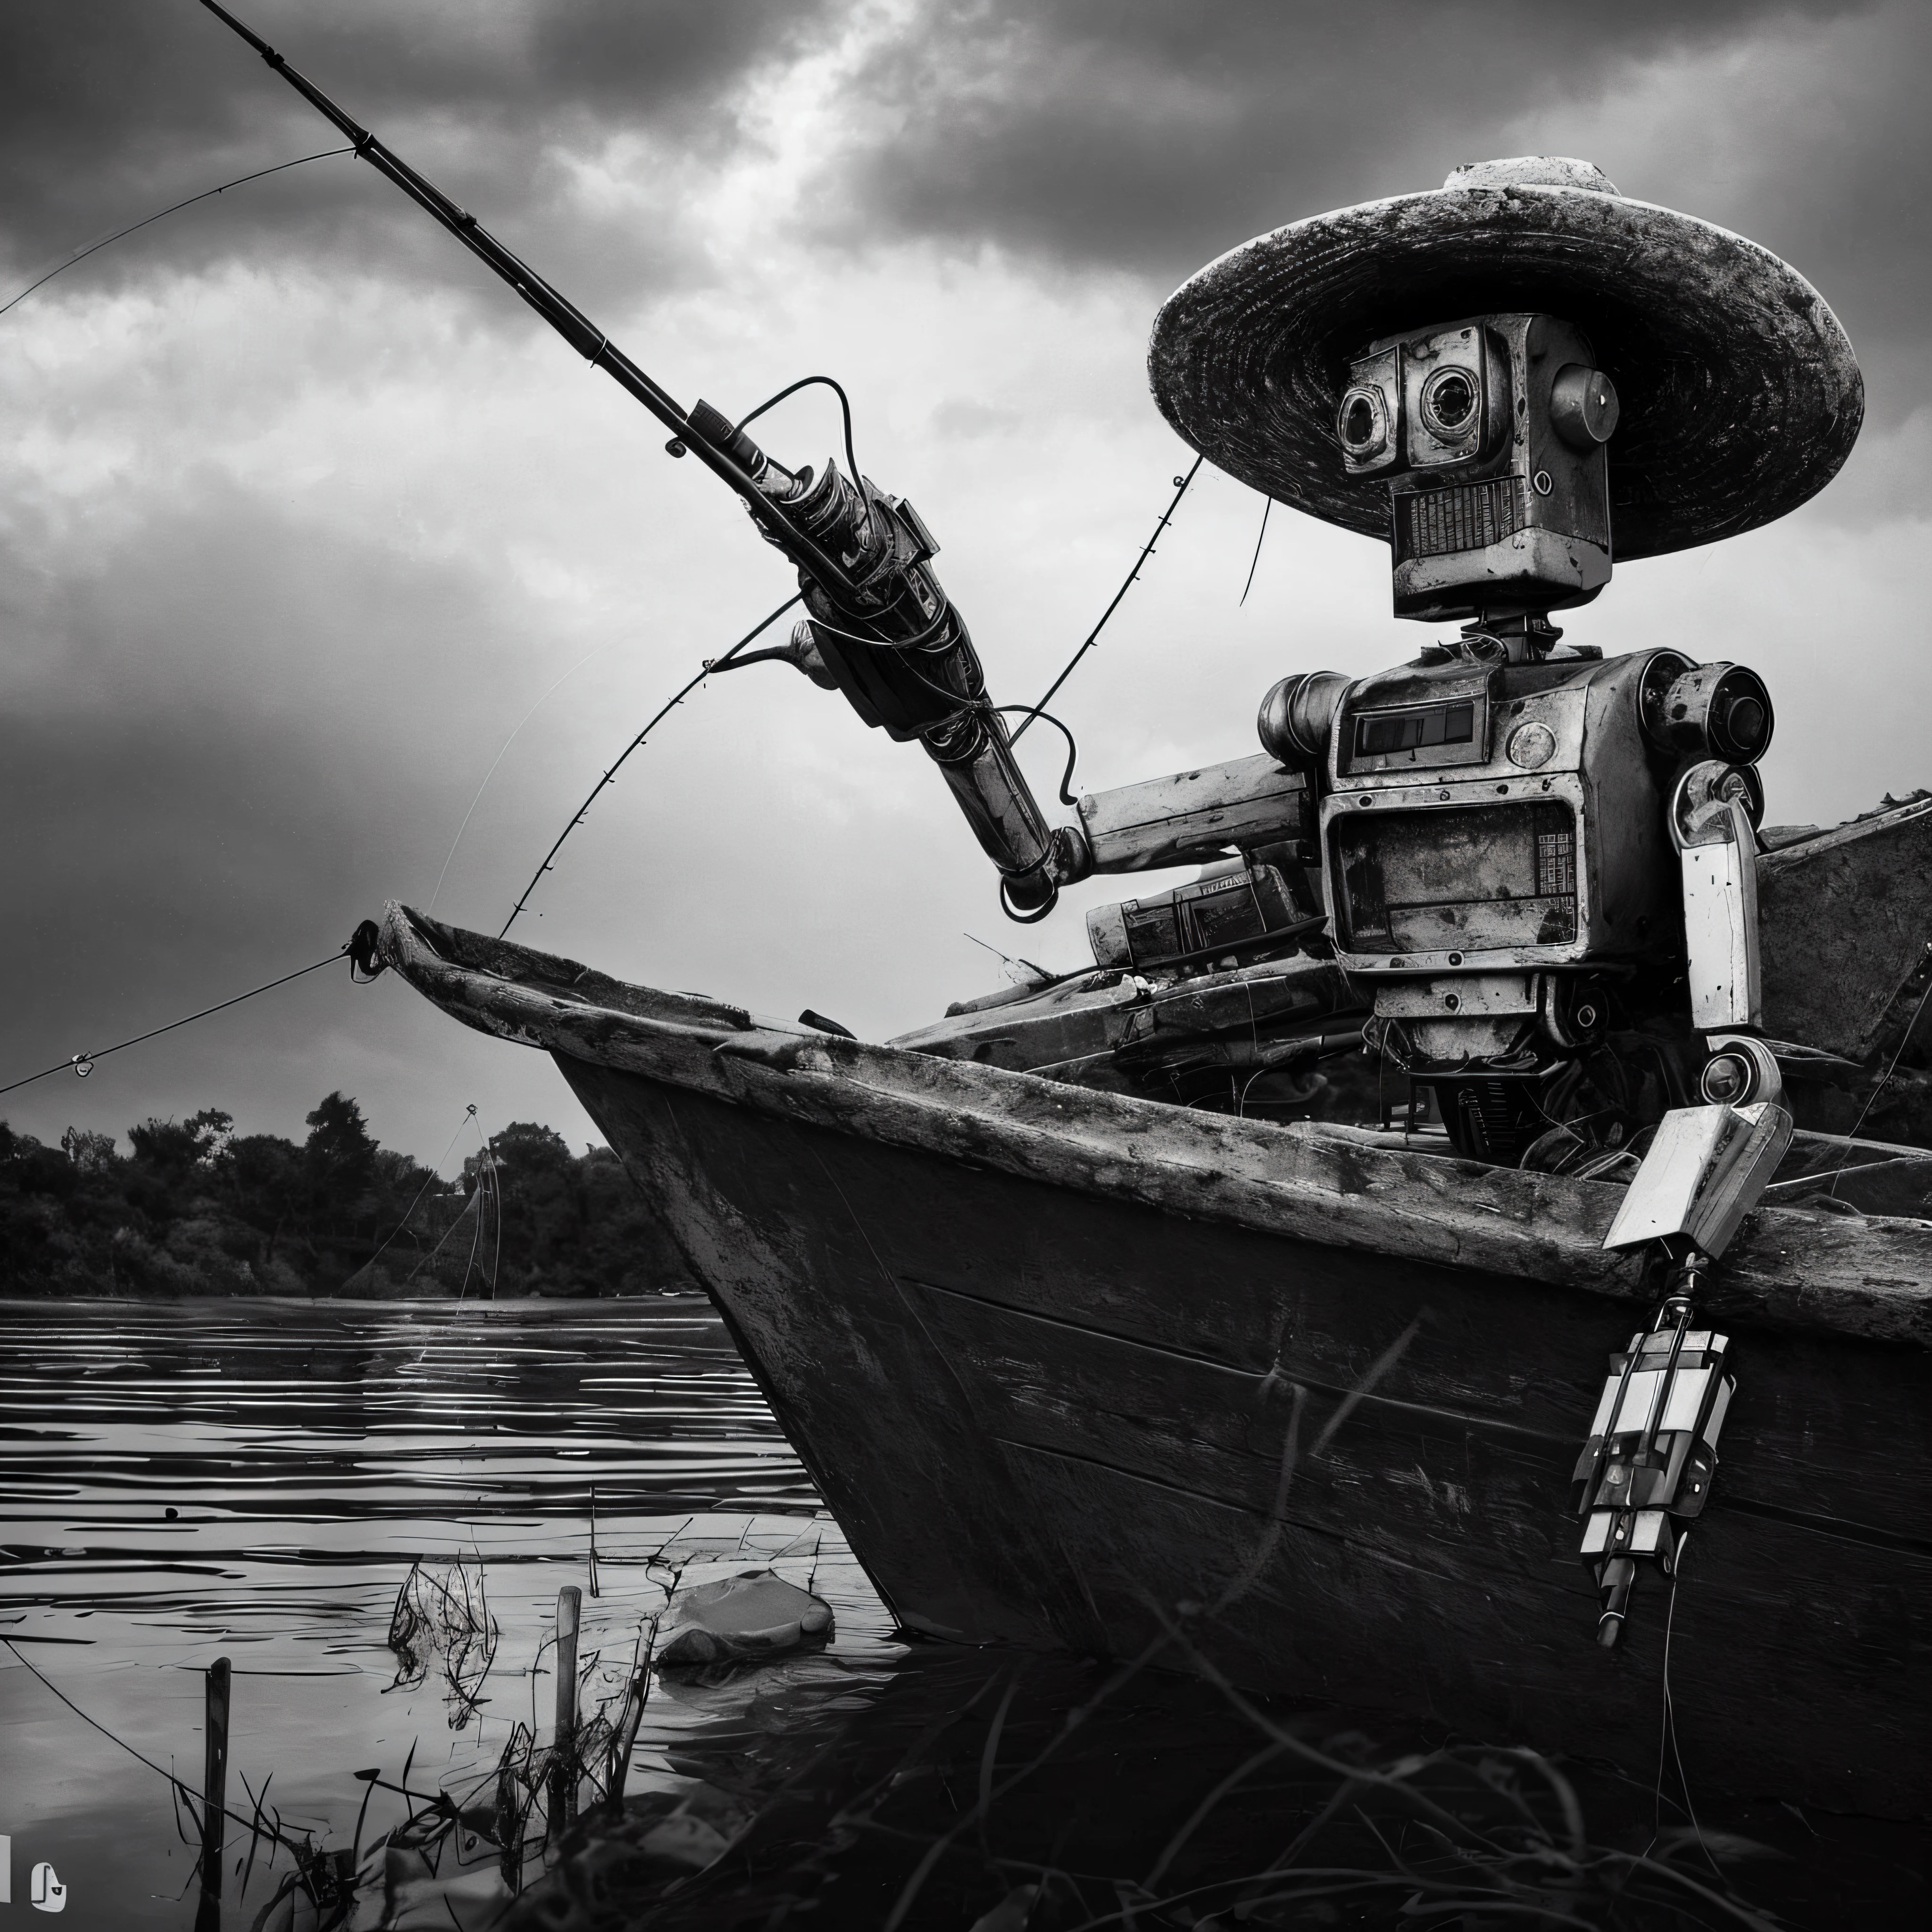 arafed robot sitting in a boat with a fishing pole, the robot has